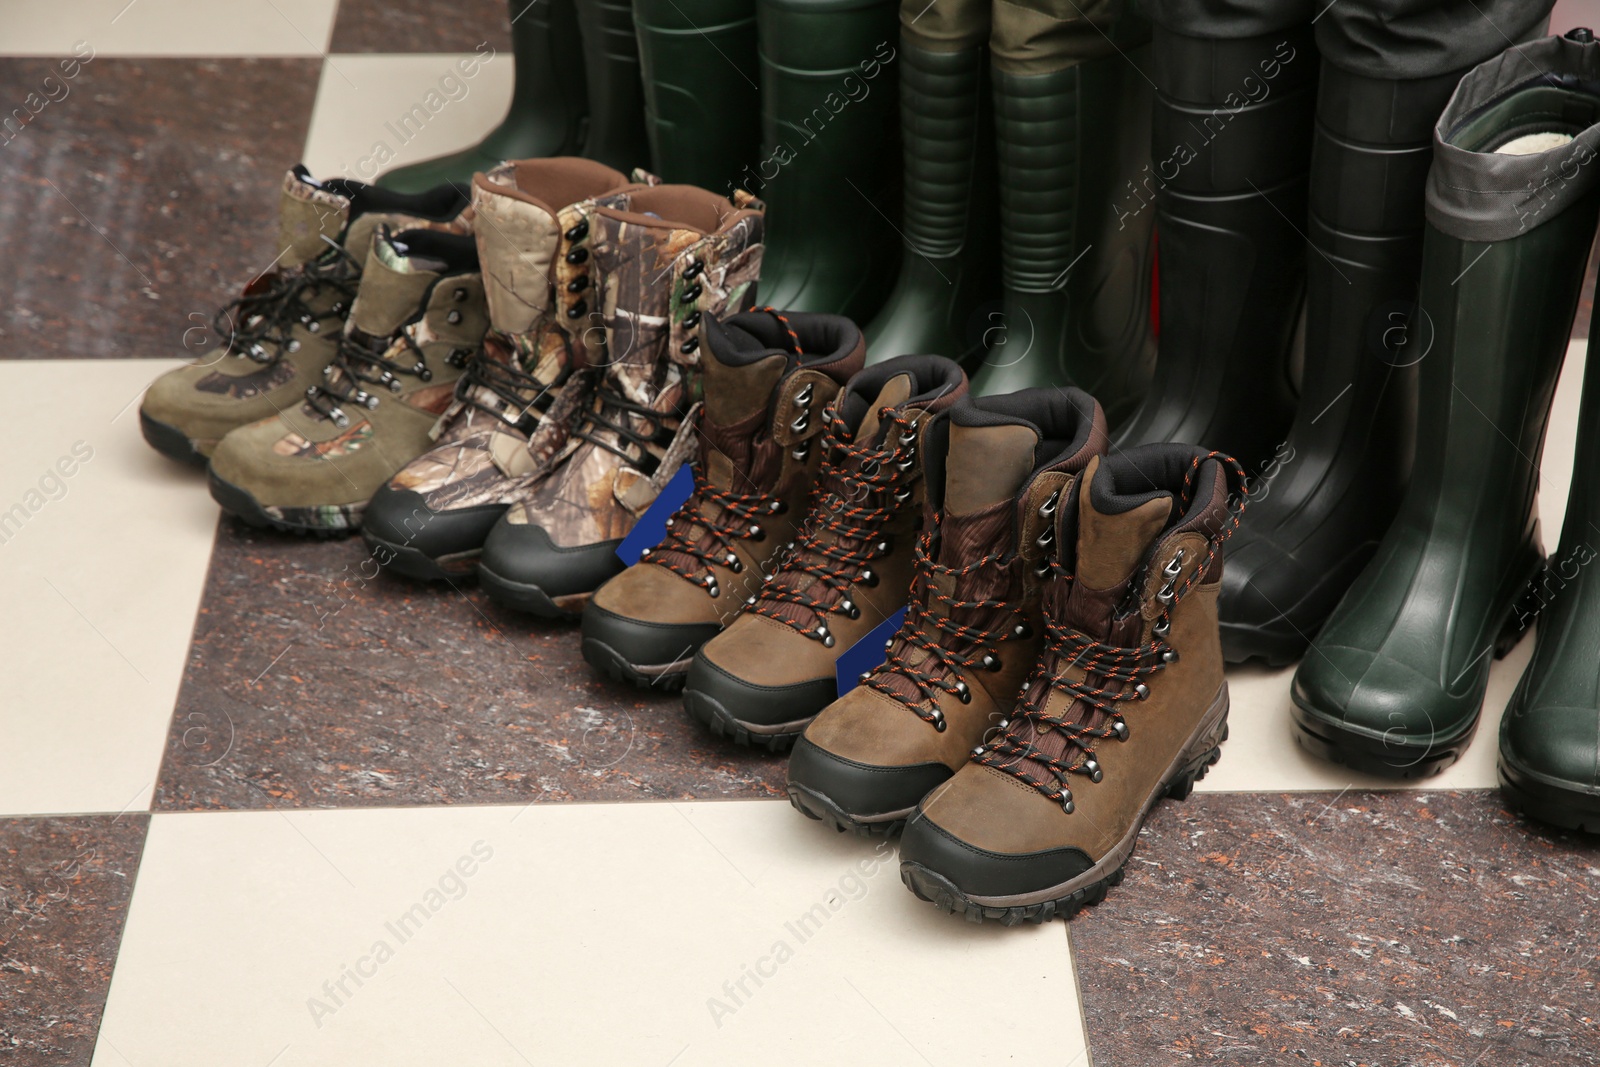 Photo of Footwear for fishing on floor in sports shop